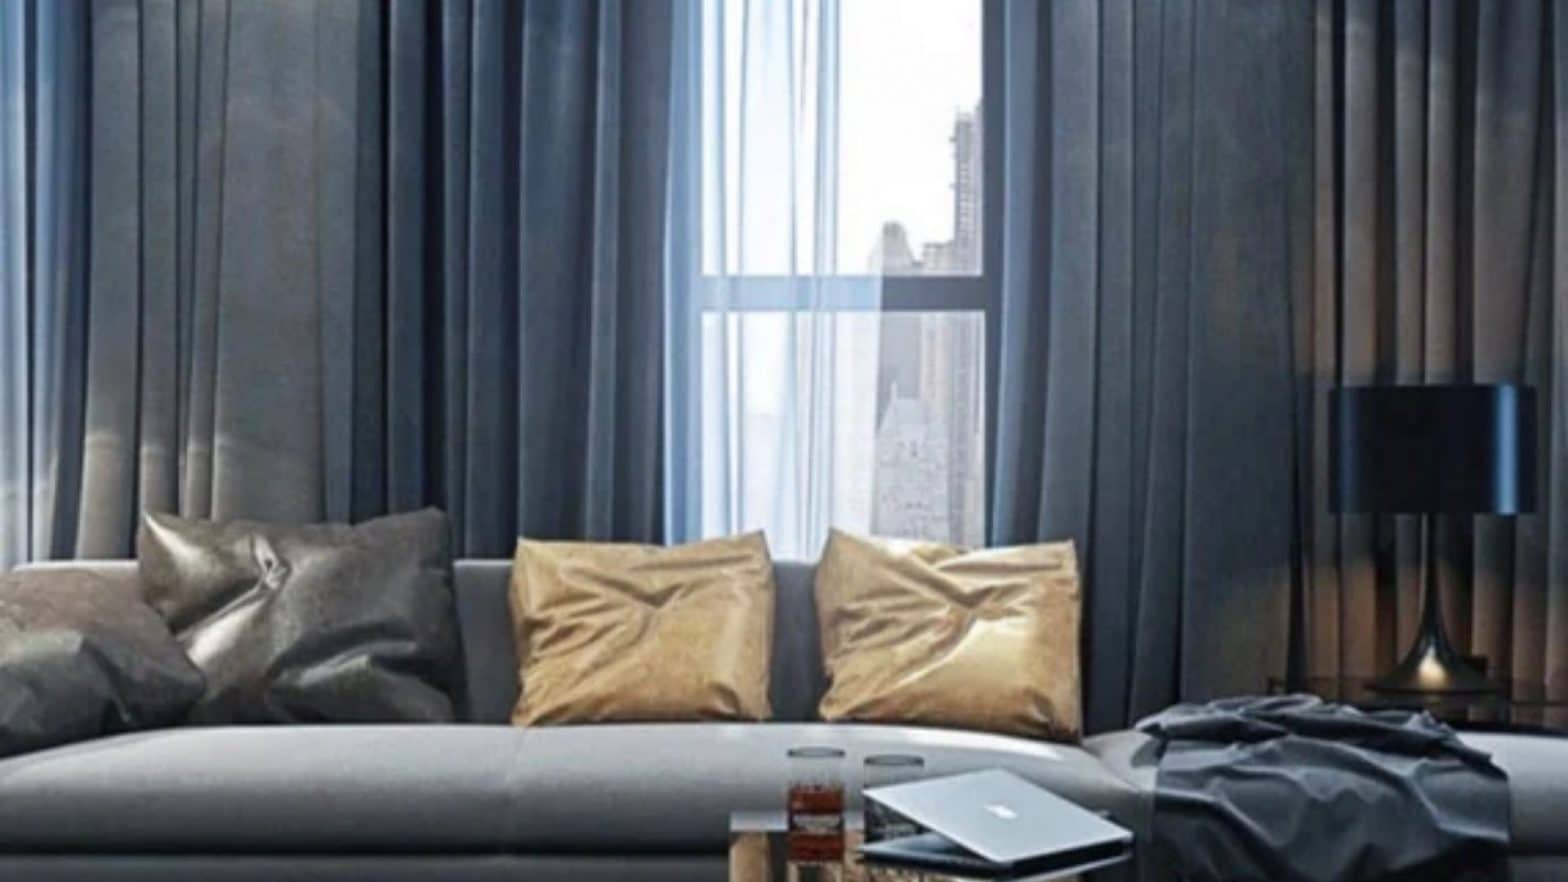 Discover How Satin Luxury Curtains Can Make Your Home Look Elegant